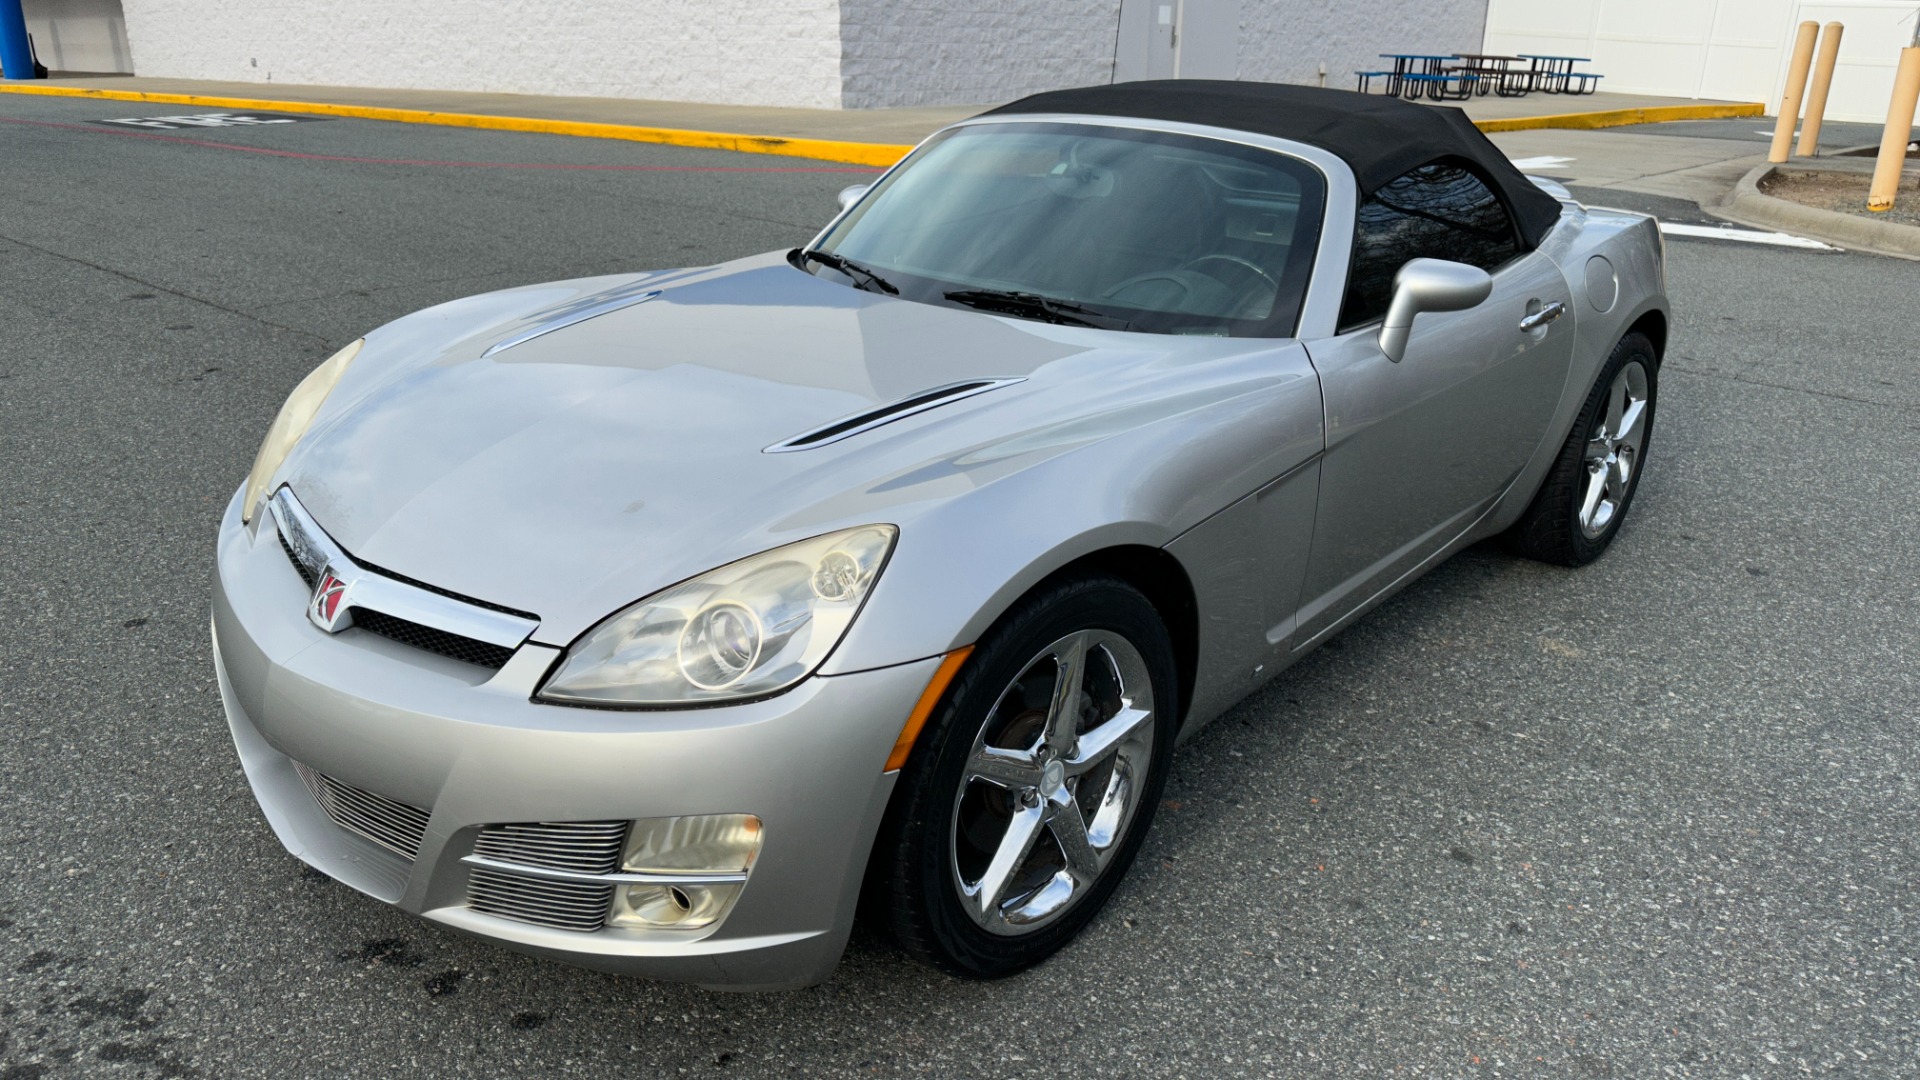 Used 2008 Saturn Sky CONVERTIBLE / MONSOON AUDIO / AUTOMATIC / PREMIUM TRIM / SPOILER for sale $10,995 at Formula Imports in Charlotte NC 28227 6